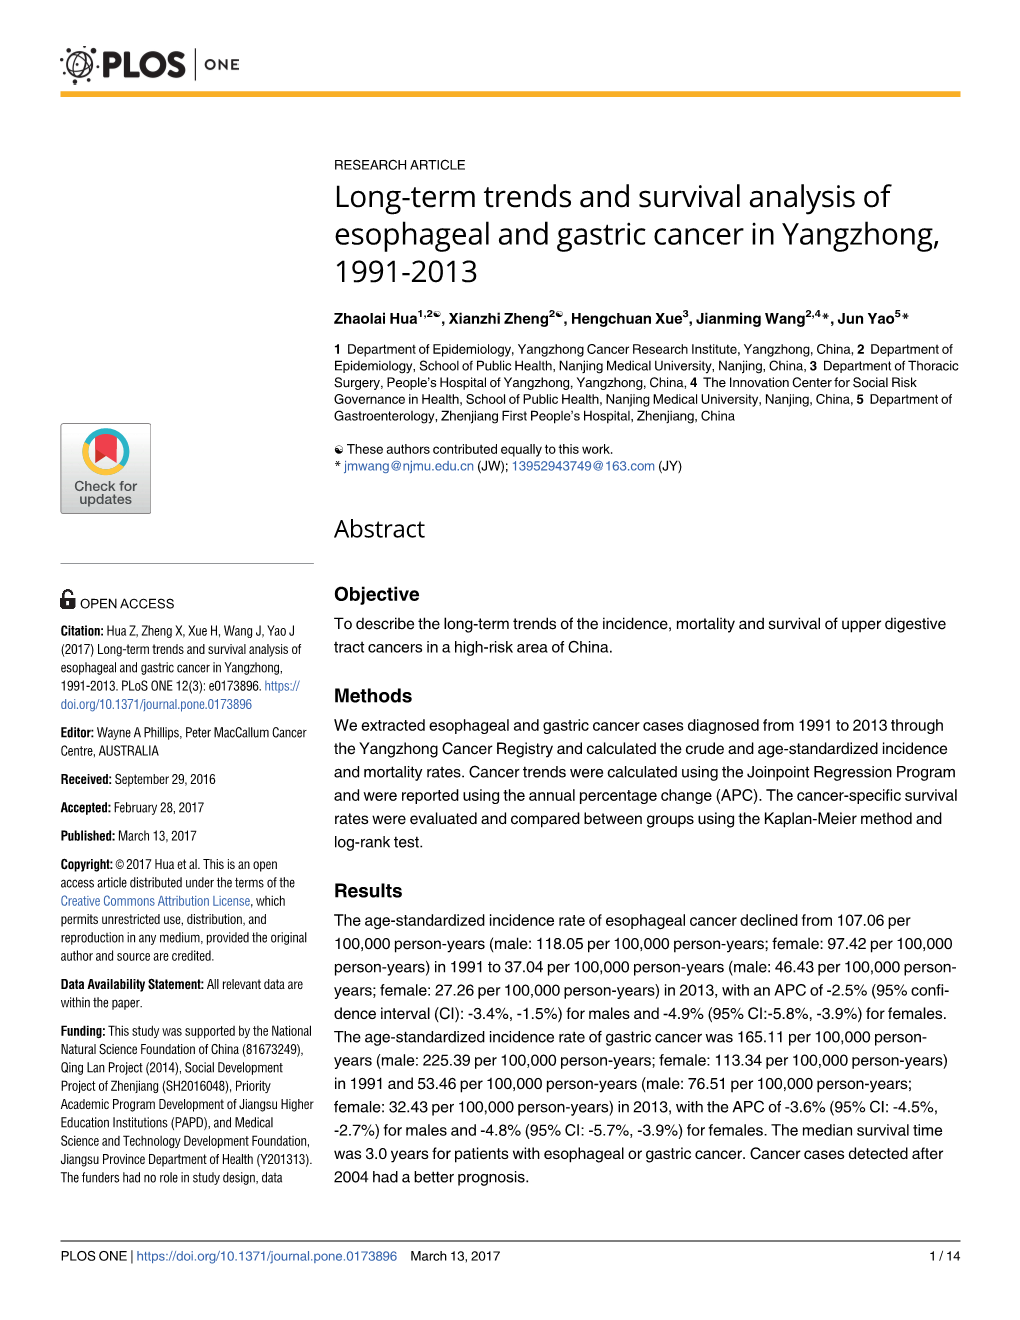 Long-Term Trends and Survival Analysis of Esophageal and Gastric Cancer in Yangzhong, 1991-2013